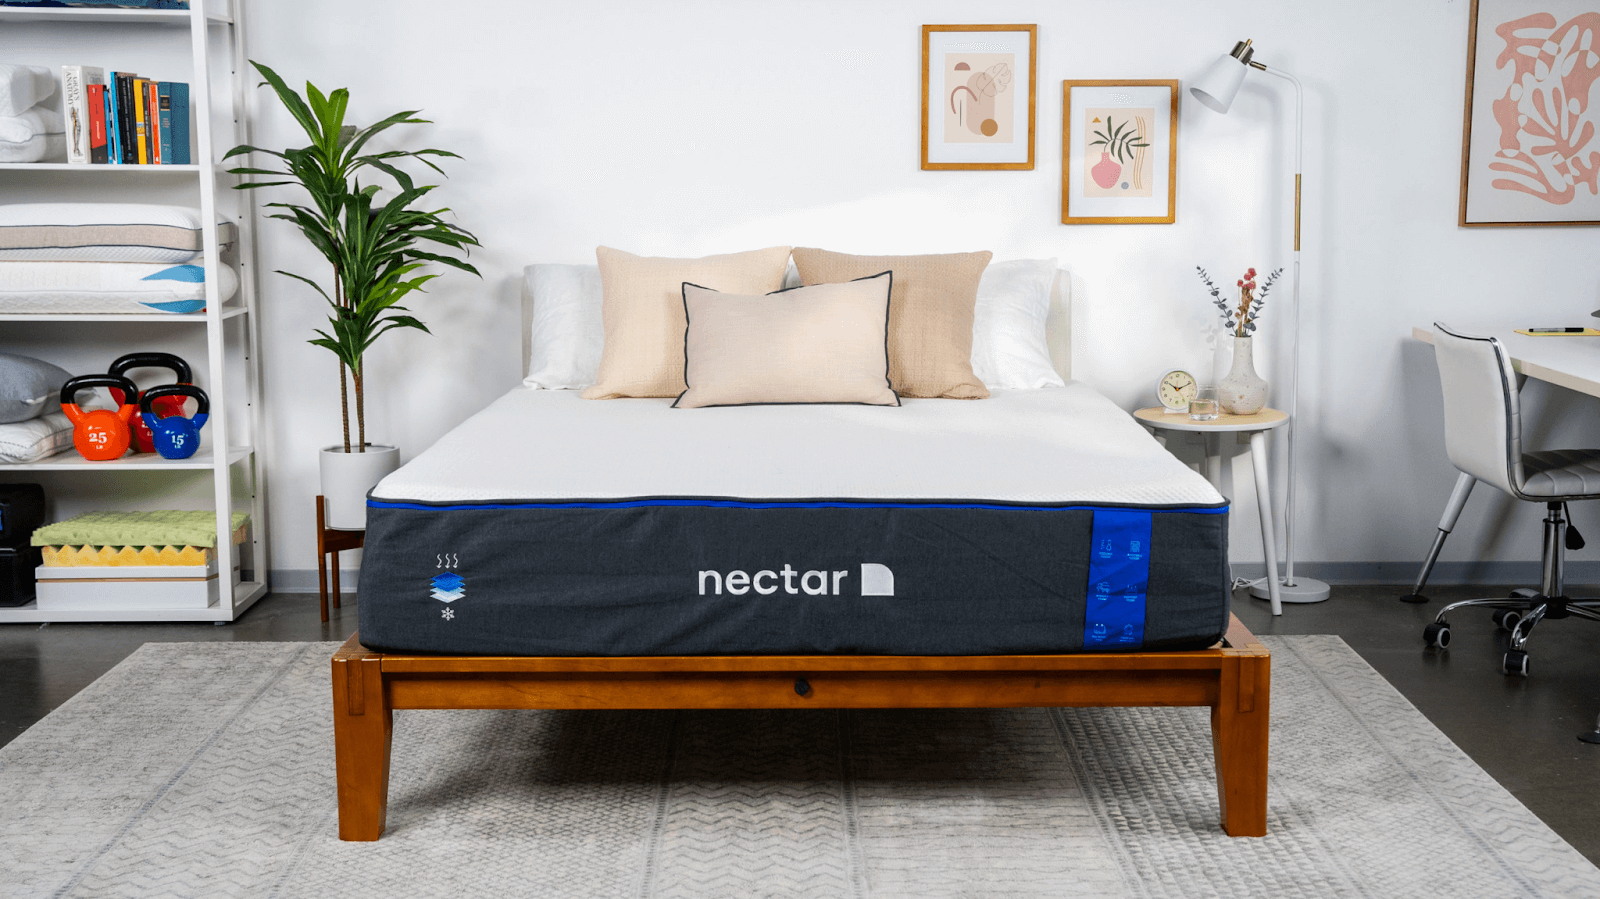 Nectar mattresses can be extremely harmful if they are not dealt with properly